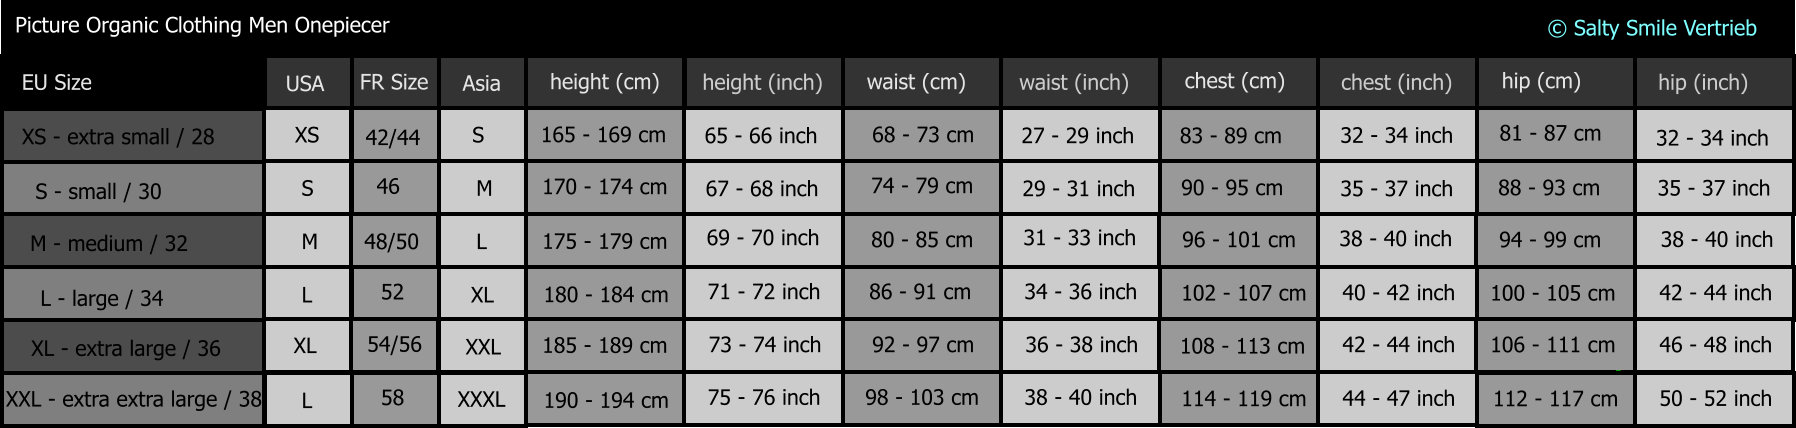 Picture organic clothing men onepiecer size chart